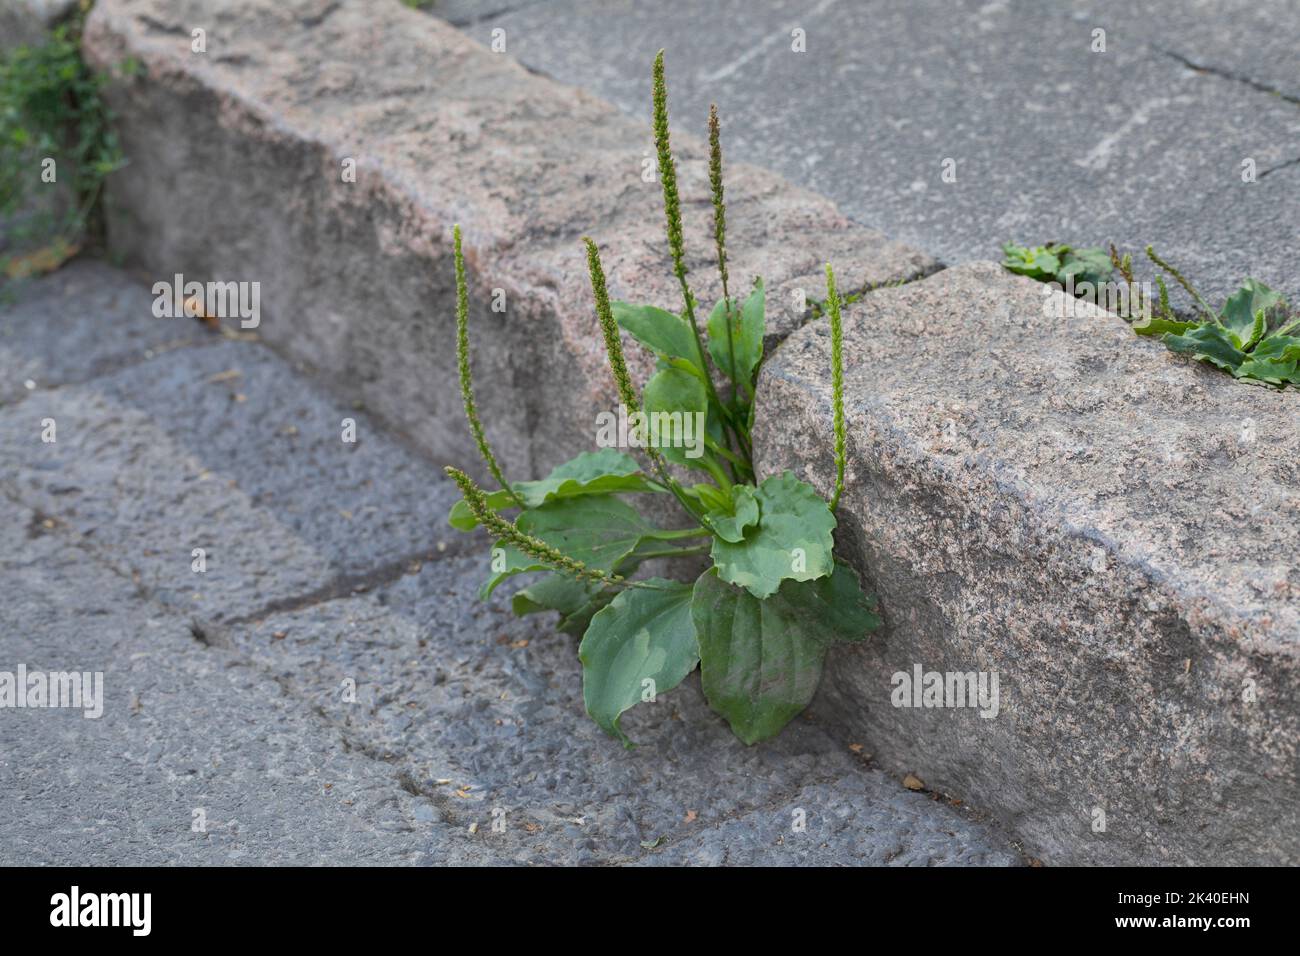 common plantain, greater plantain, broadleaf plantain, nipple-seed plantain, white man's footprint (Plantago major), growing at a curbstone, Germany Stock Photo